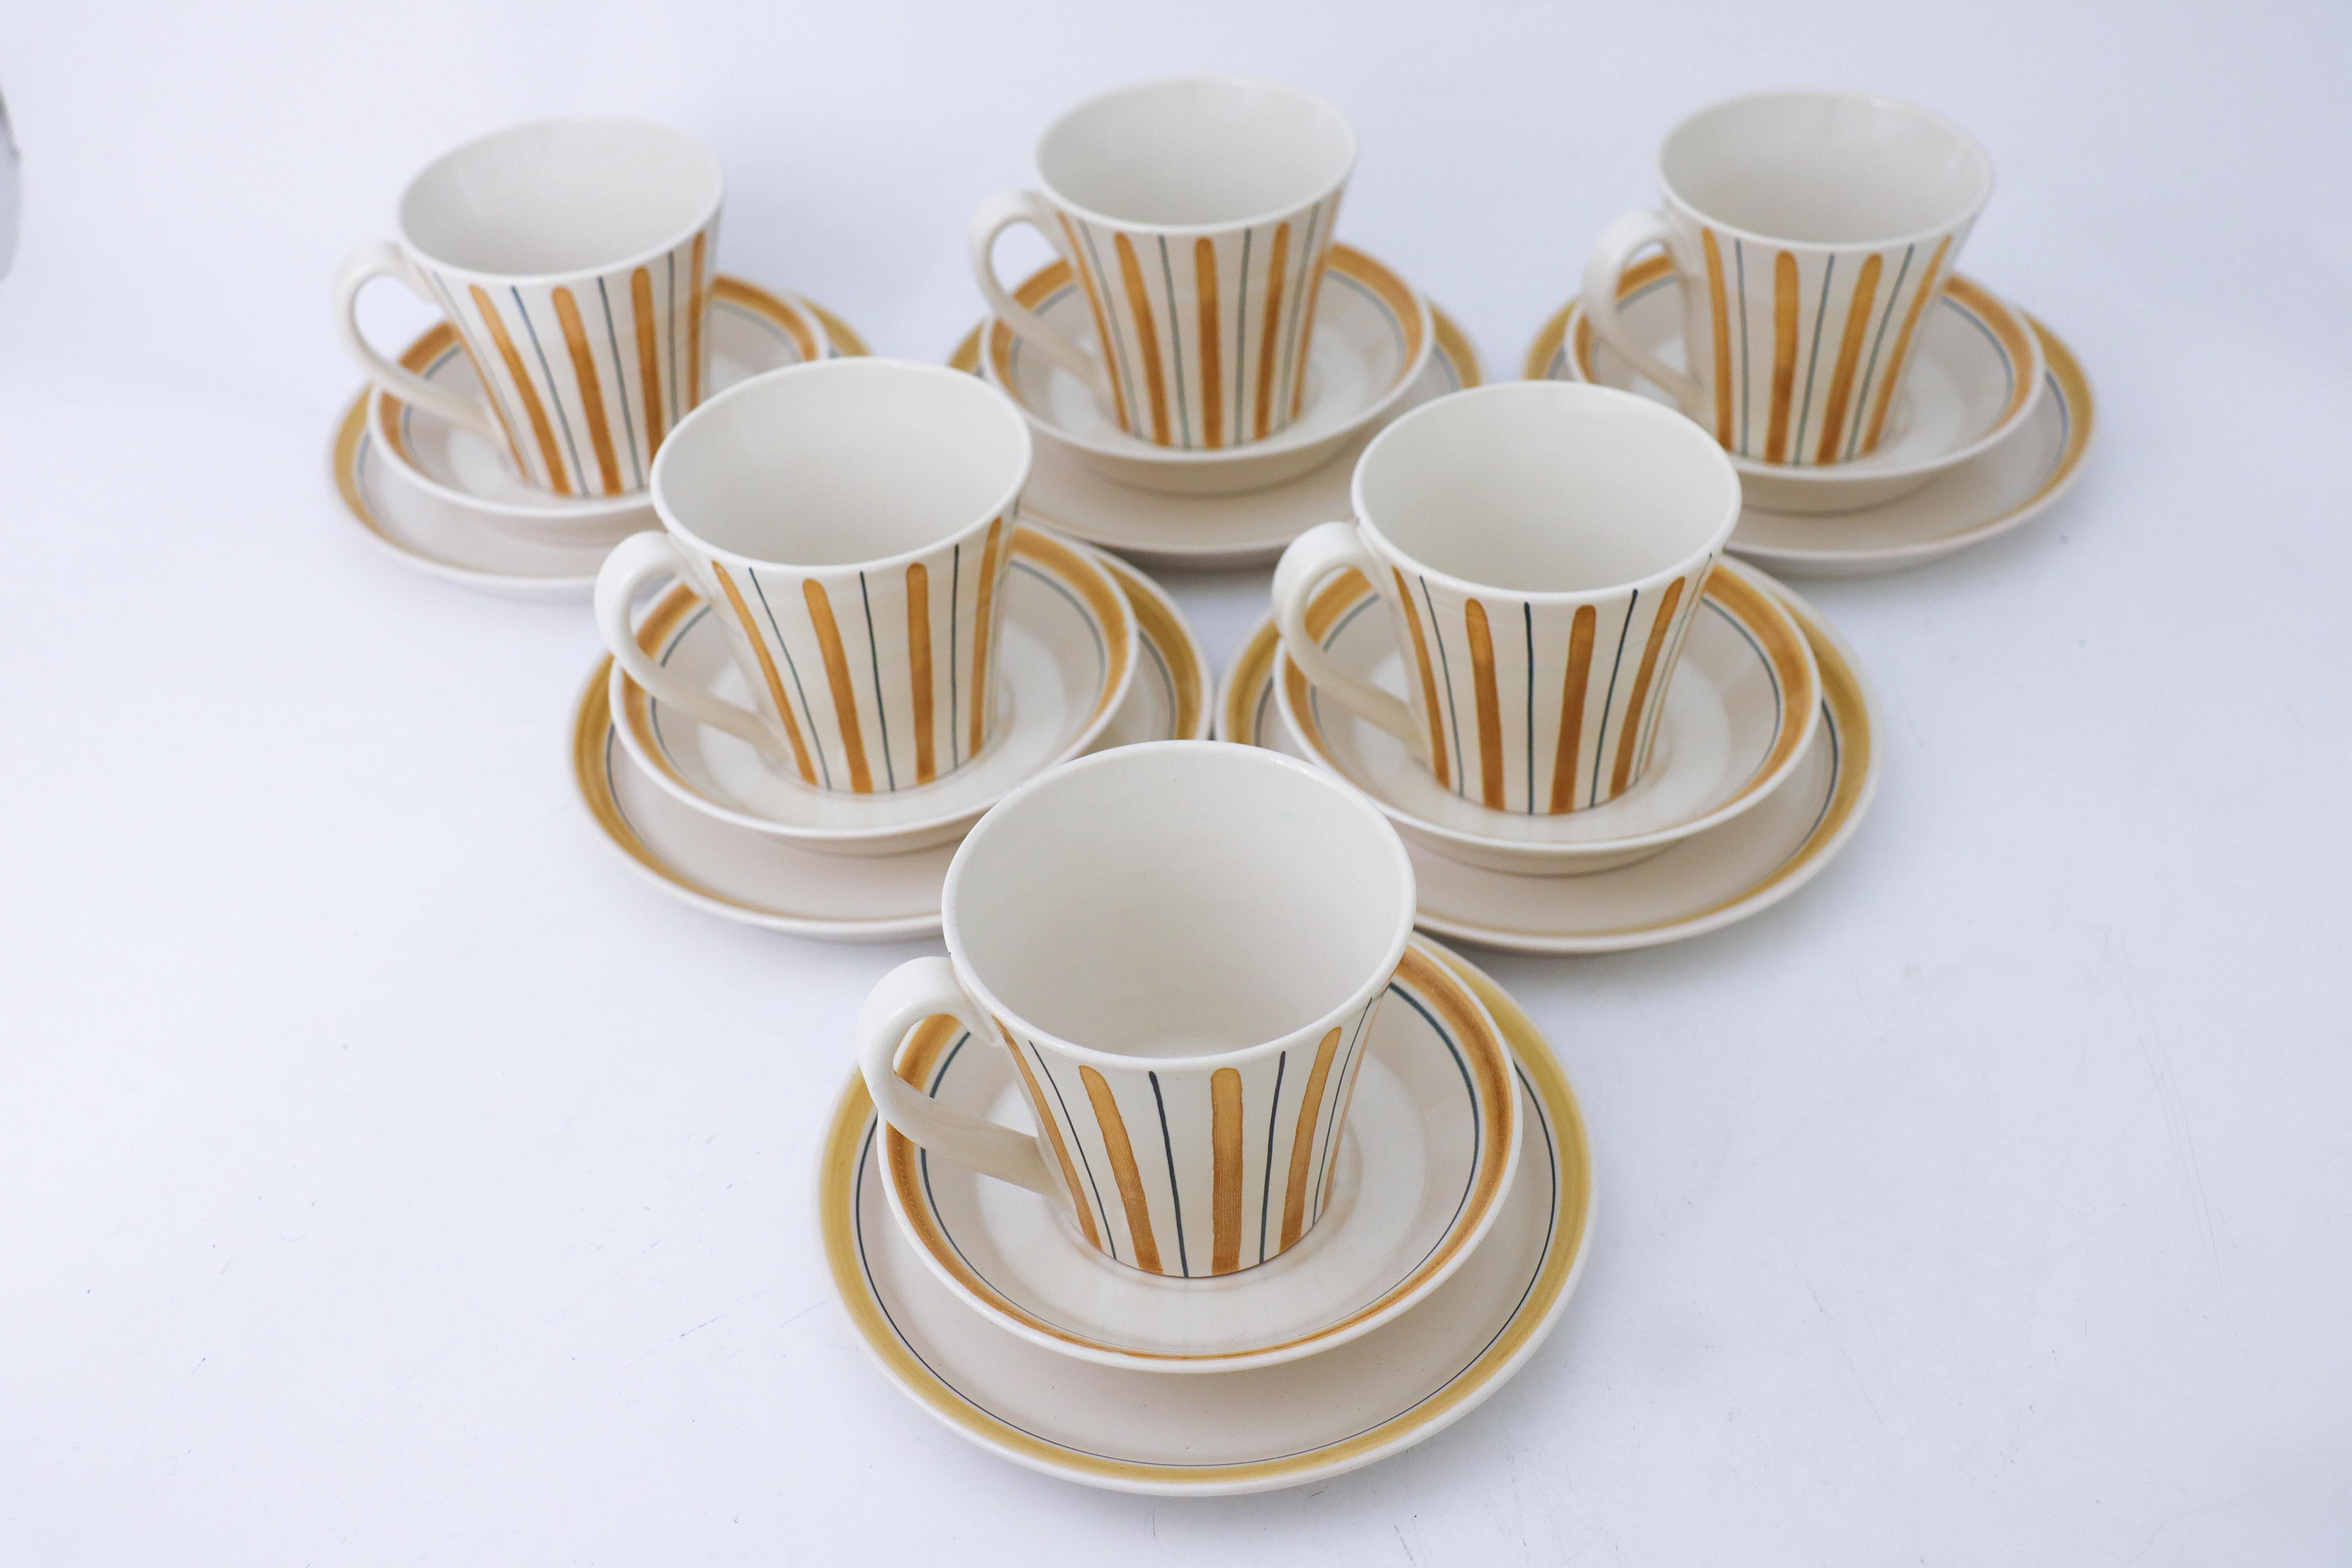 6 Sets of Tea Cups with Saucers & Plates, 